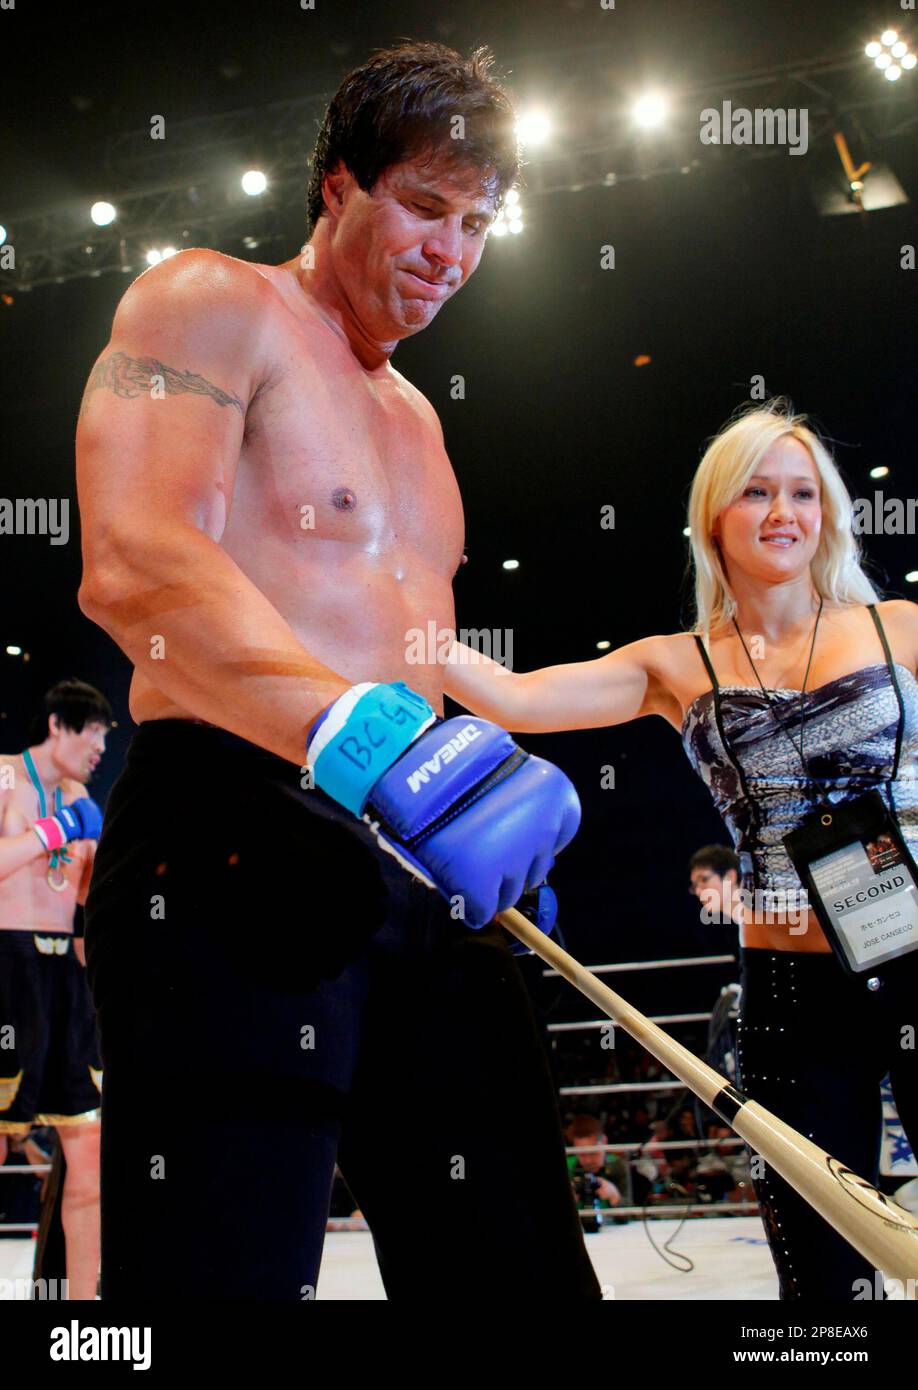 former major league mvp player jose canseco leaves the ring with his girl friend heidi northcott after losing his debut match against super heavyweight hong man choi of south korea in the mixed martial arts dream 9 card at yokohama arena in yokohama japan tuesday may 26 2009 hong beat canseco with a knockout in the 1st round ap photoitsuo inouye 2P8EAX6